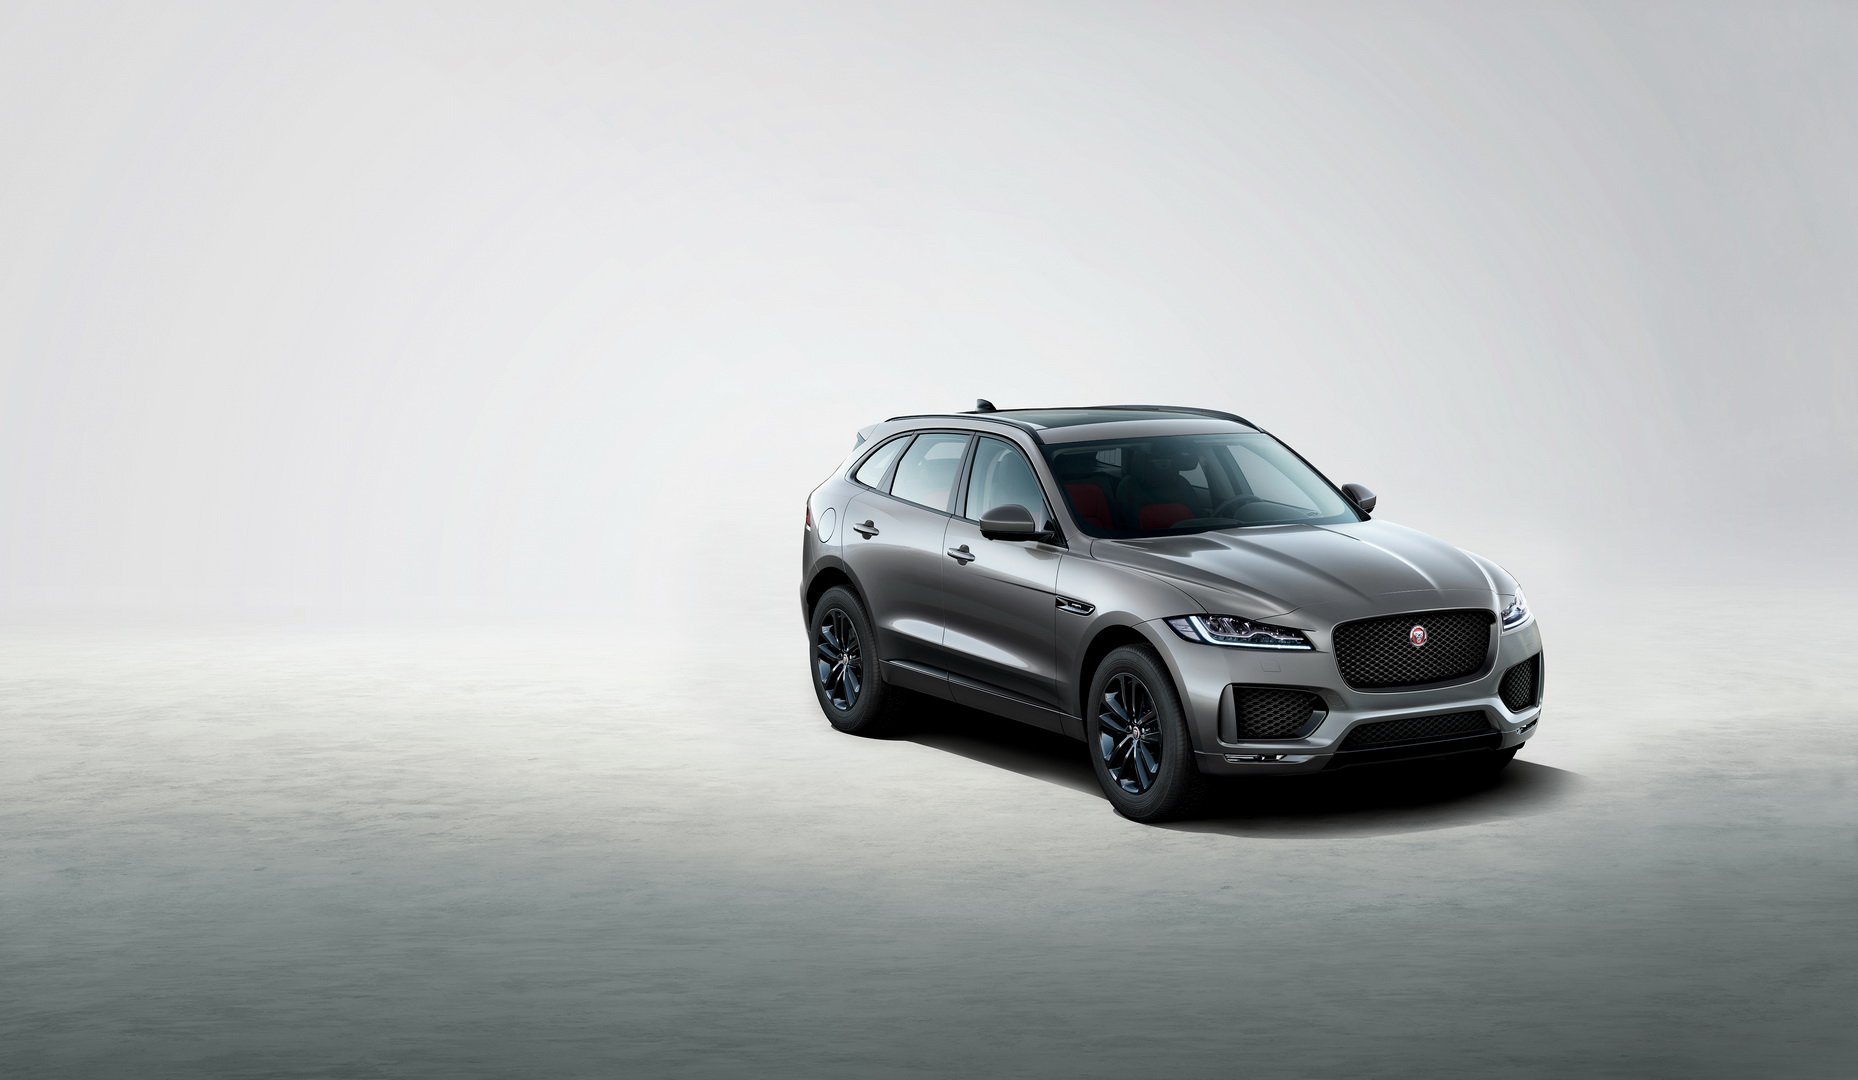 jaguar unveils two special editions based on f pace crossover_11